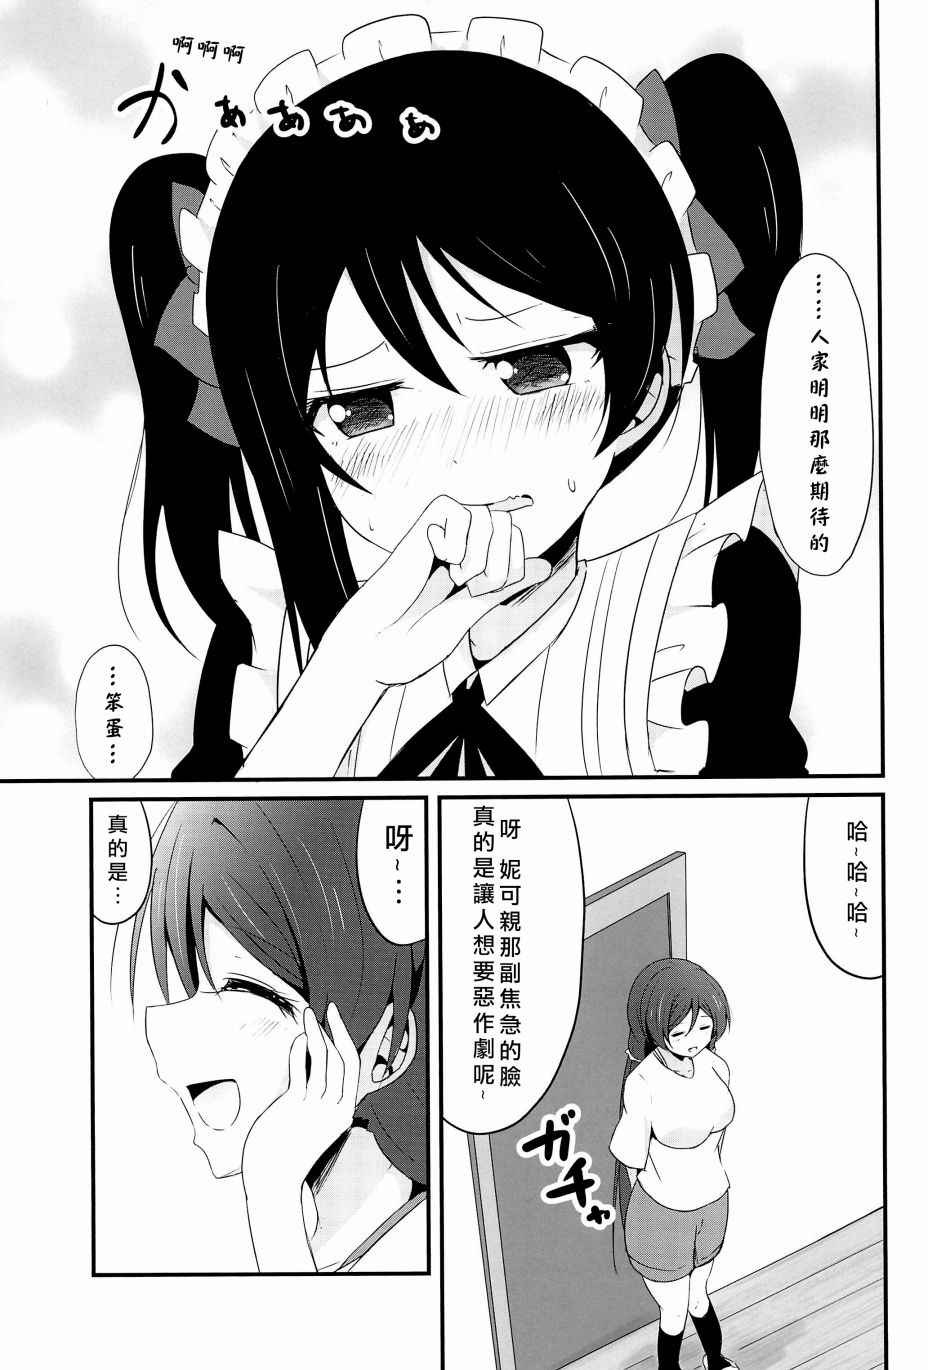 LoveLive - Happy Maid Day - 6